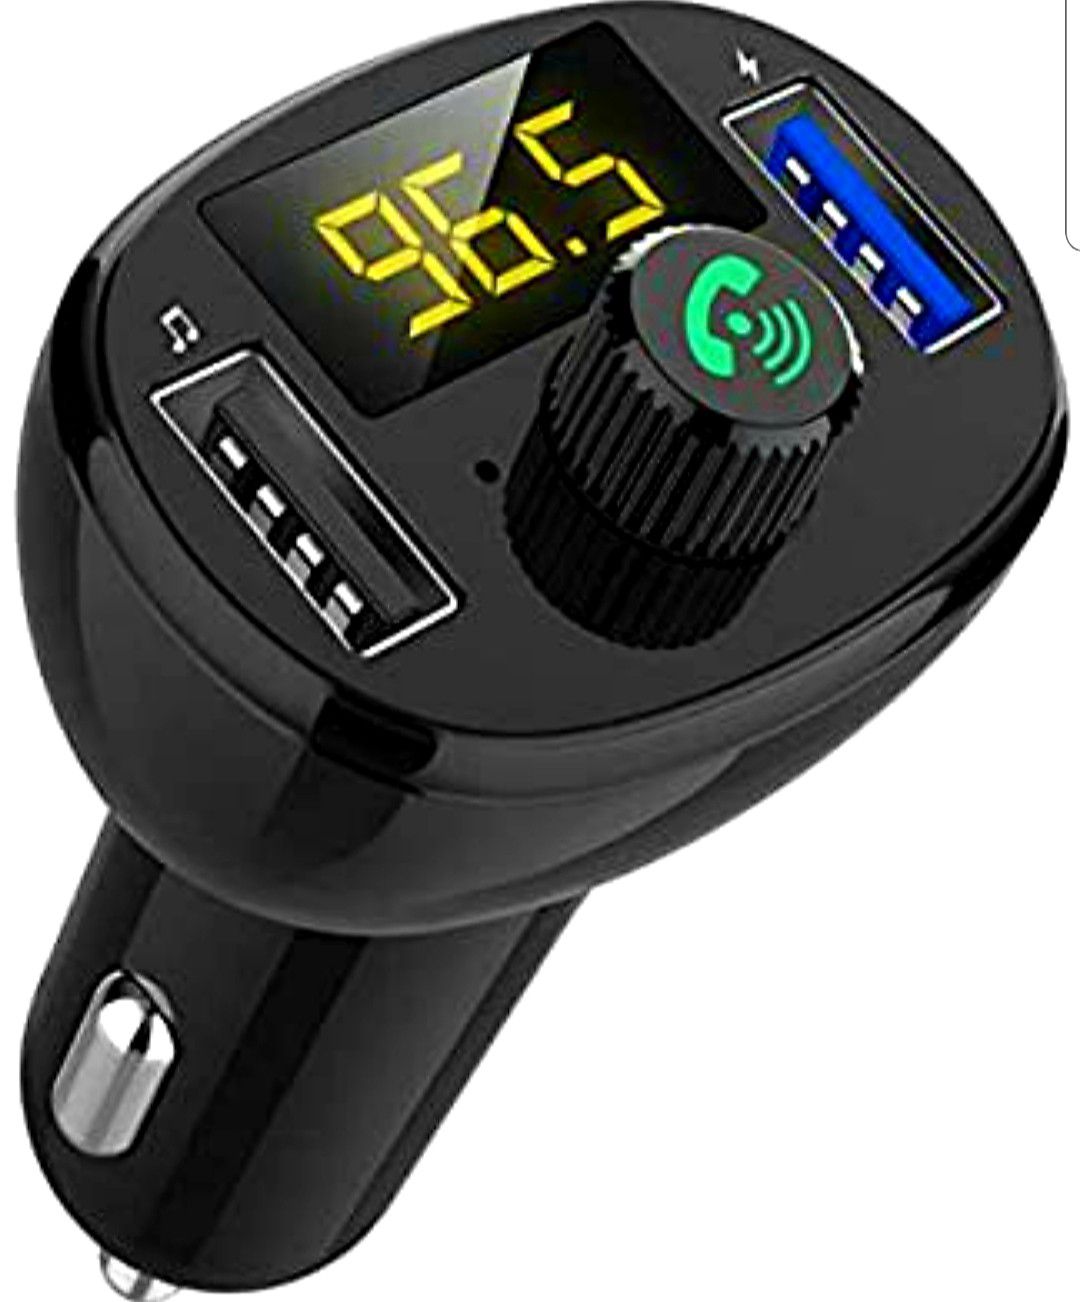 Bluetooth Car Adapter,Bluetooth FM Transmitter, 5V 3.1A Dual USB Ports Charger, Hands-Free Calling